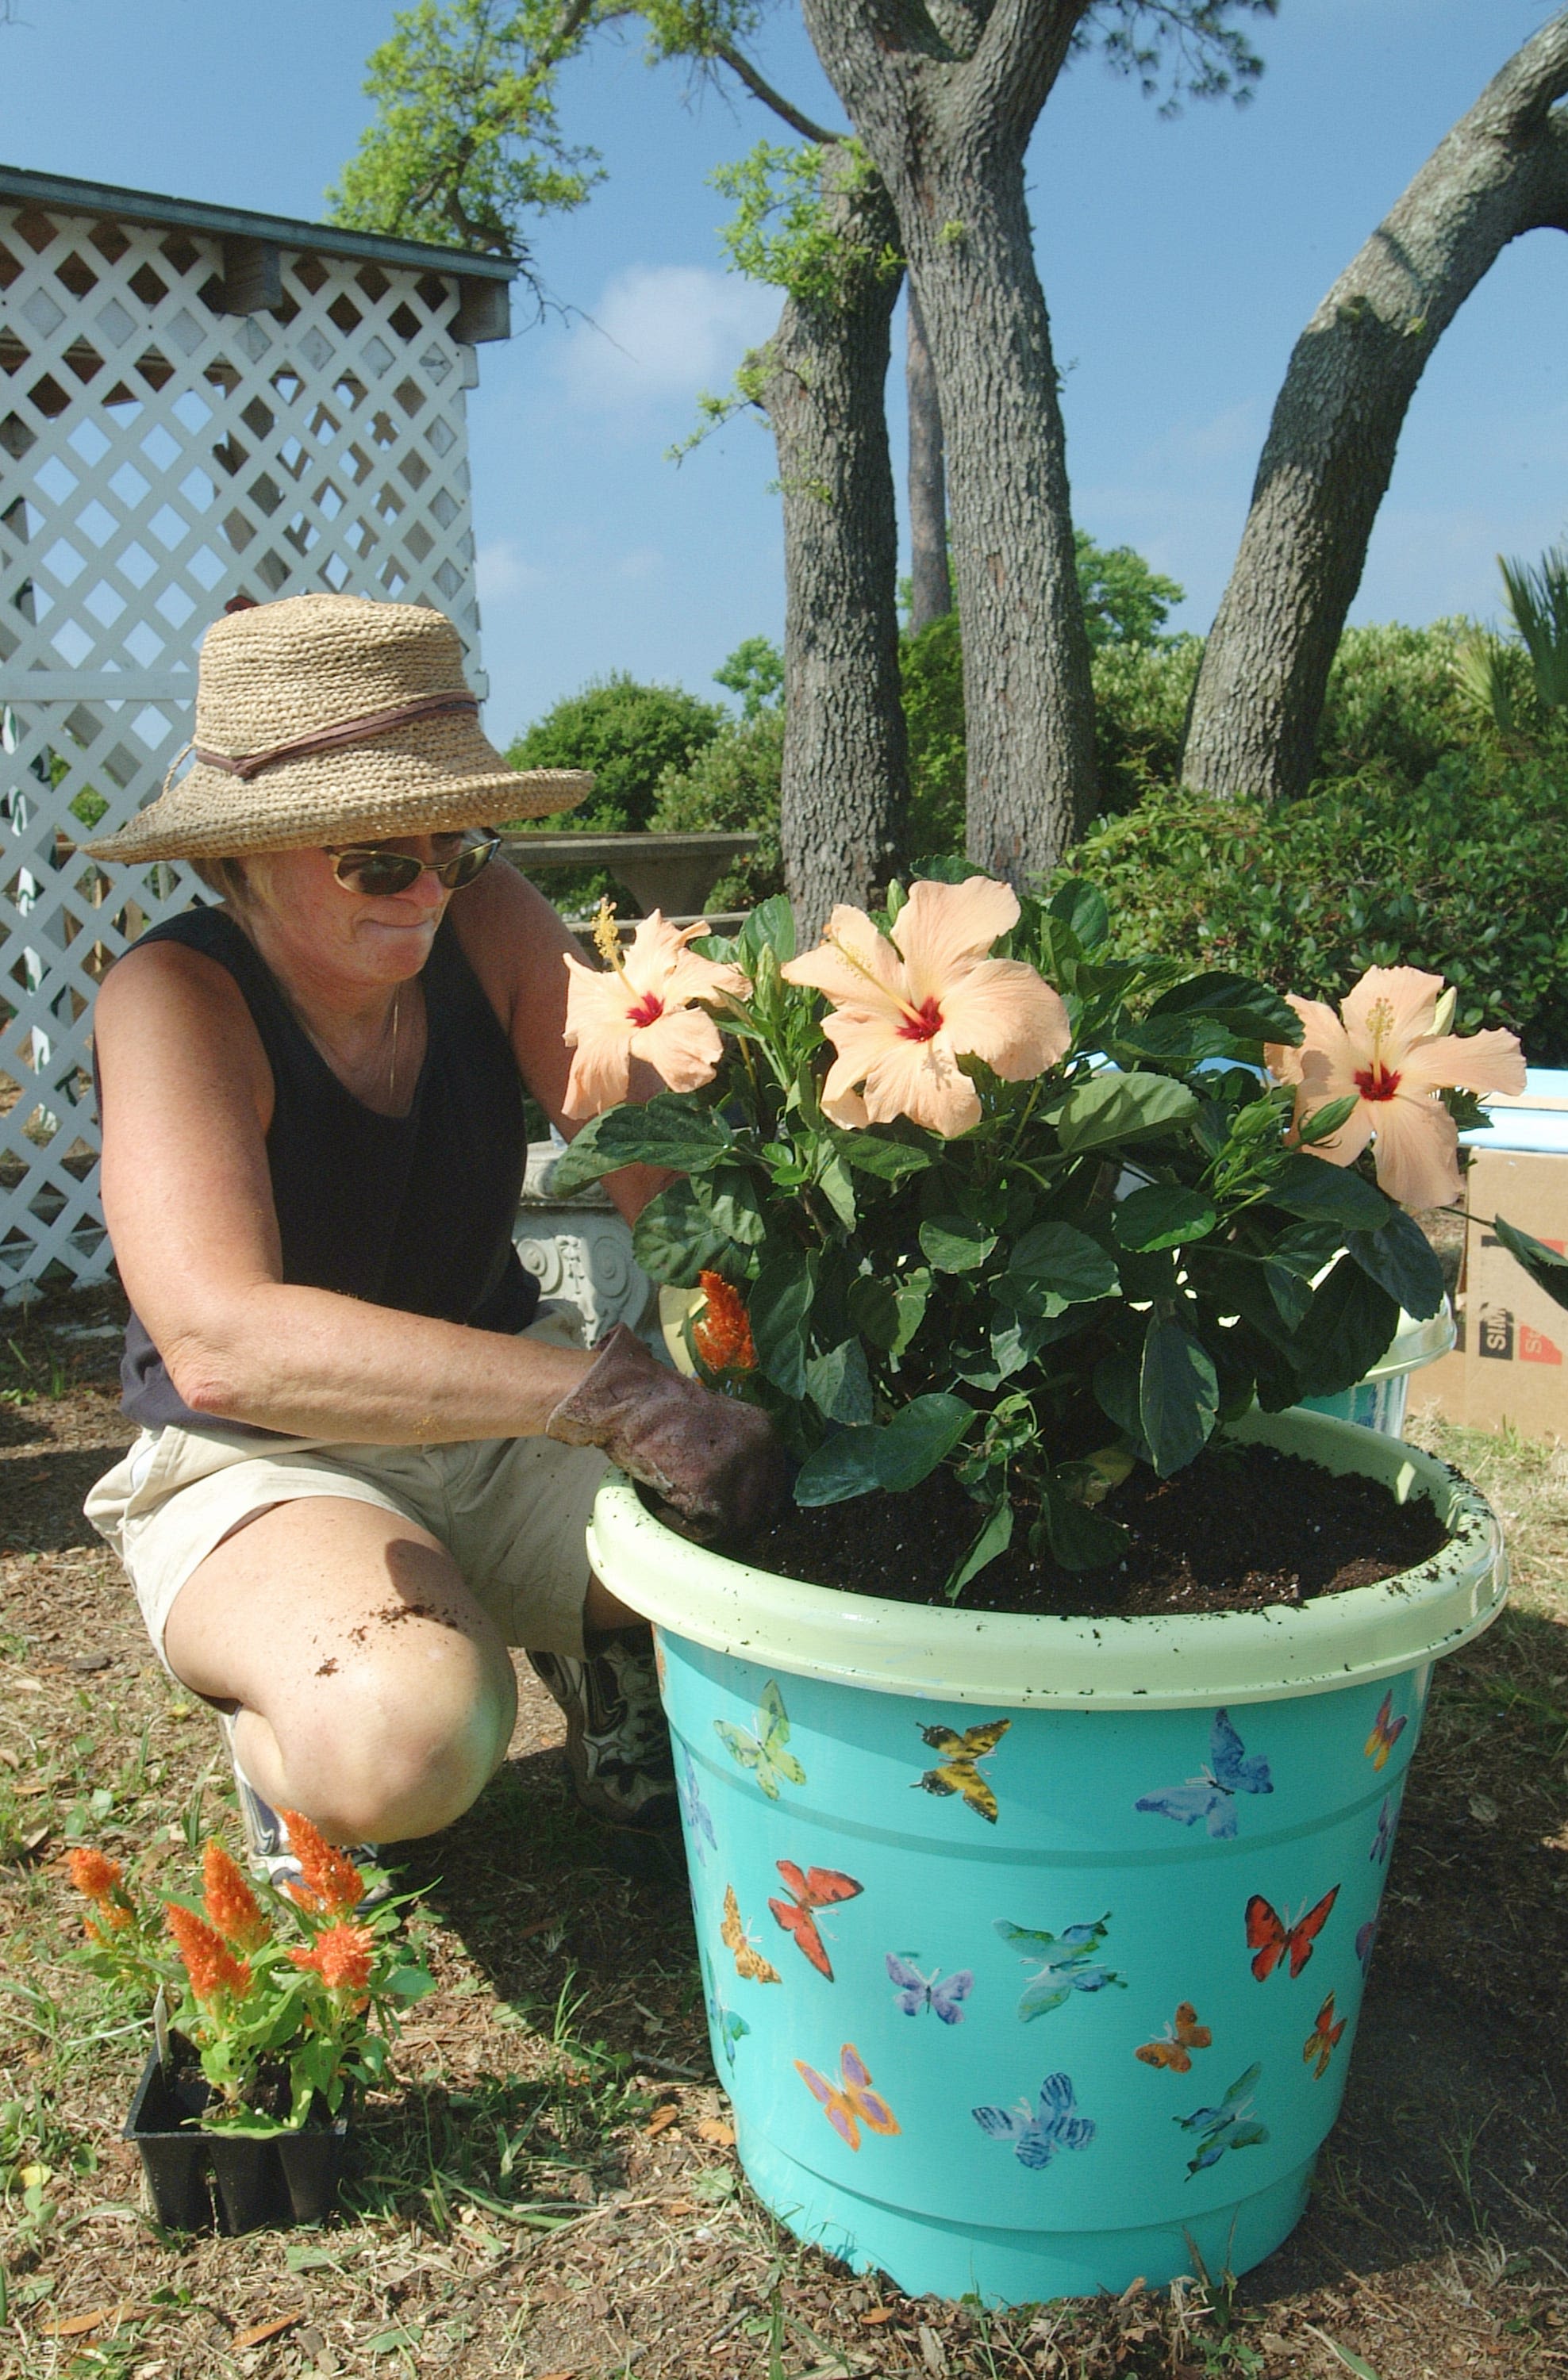 Gardening tips: Protect yourself from Florida heat, sunshine when working in the yard